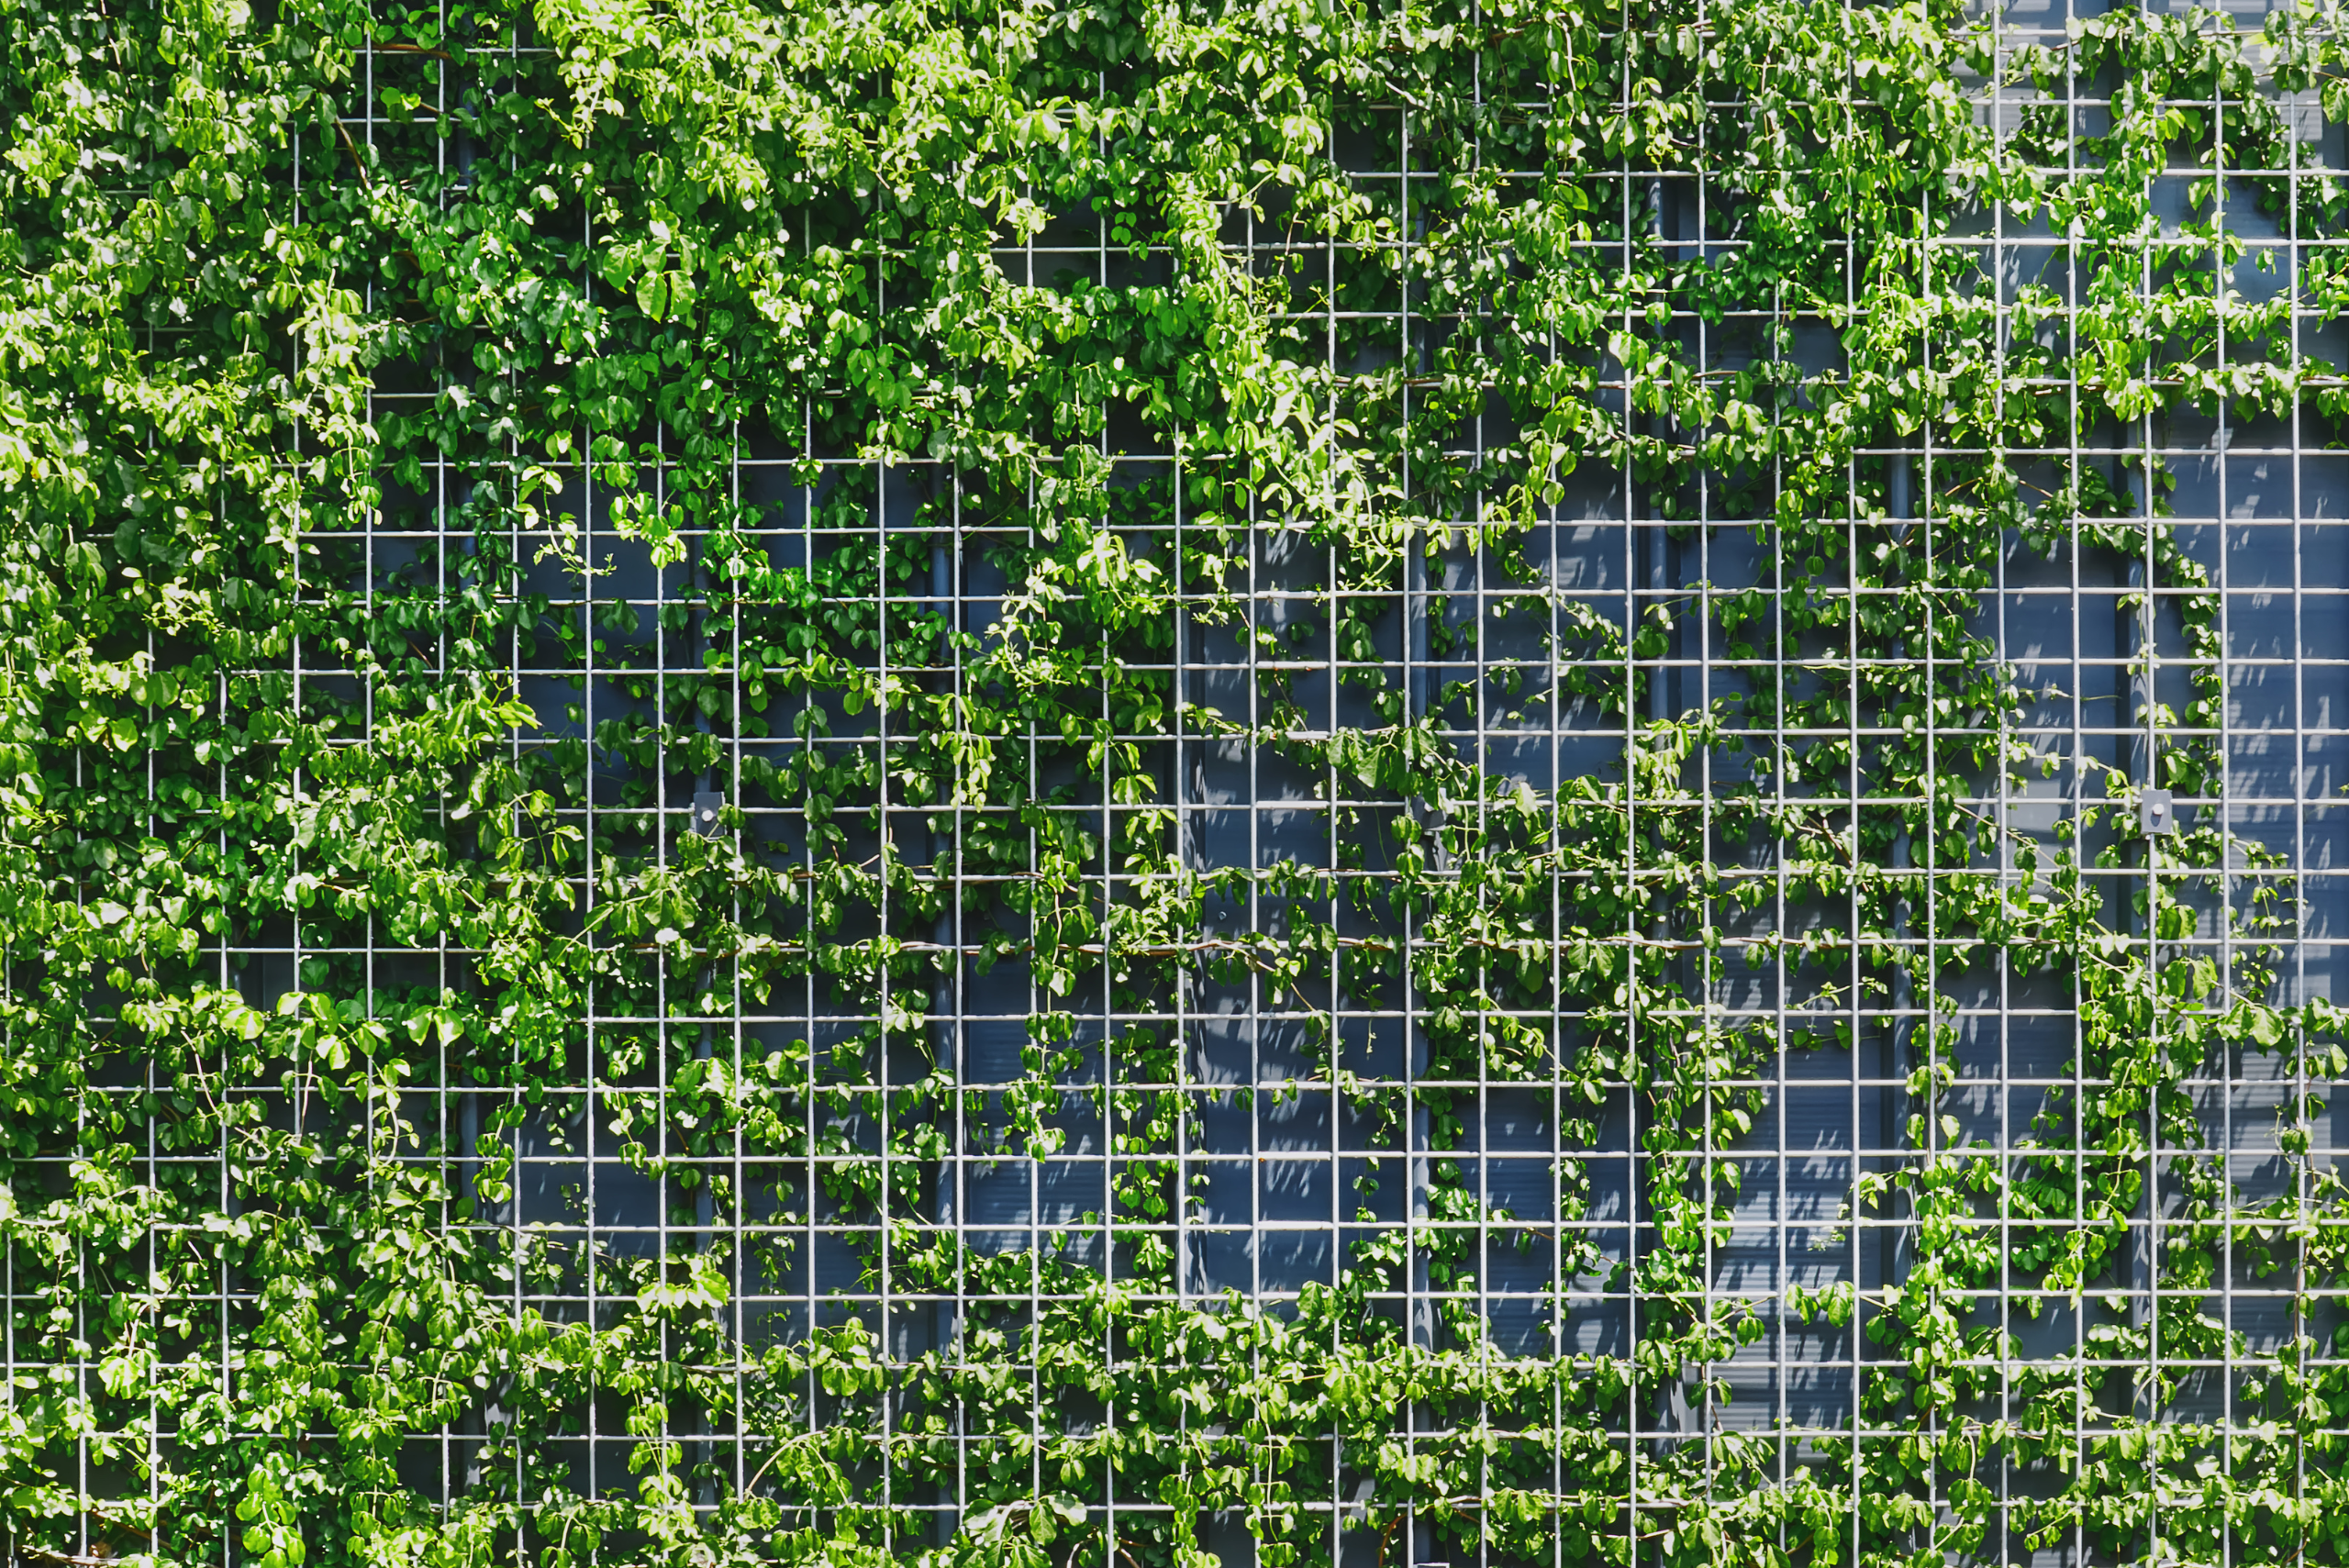 Wire mesh fence with climbing plants covering it.